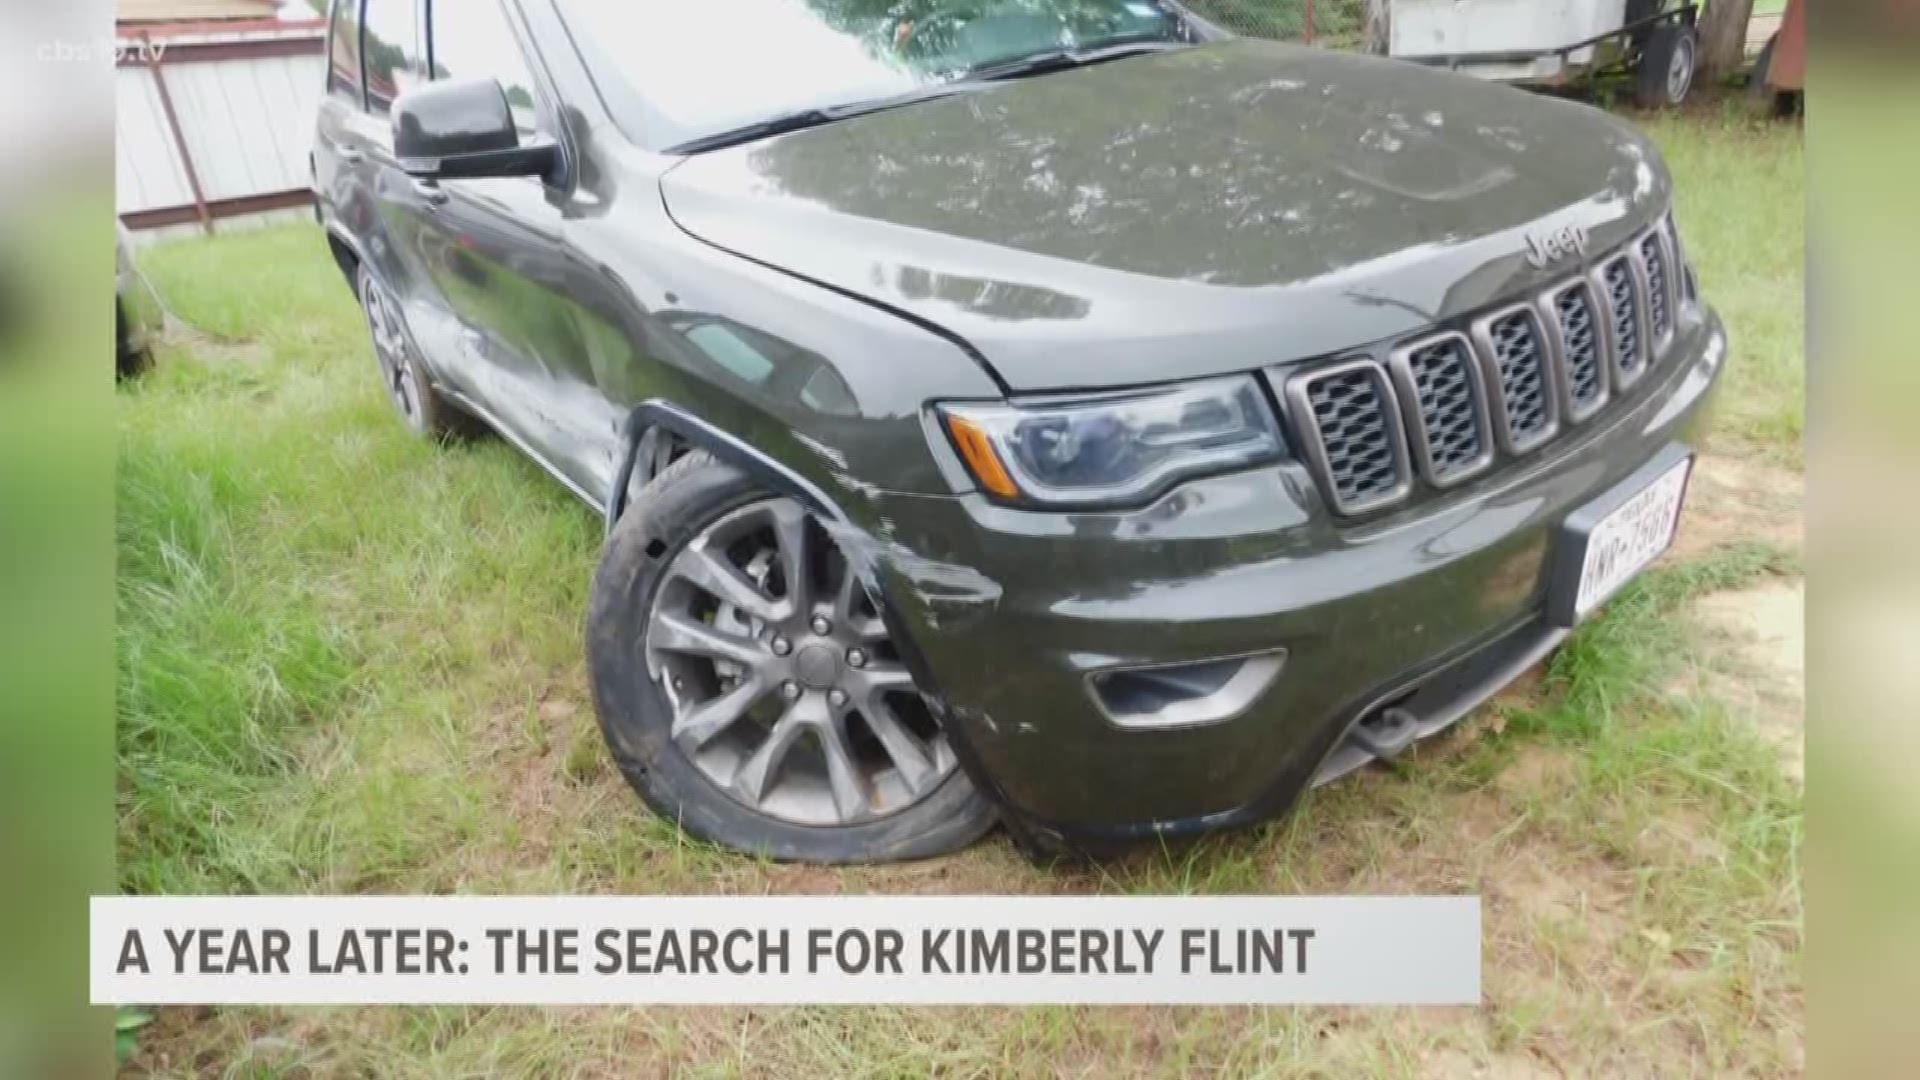 It has been an entire year, but investigators say they continue to search for Kimberly Flint.